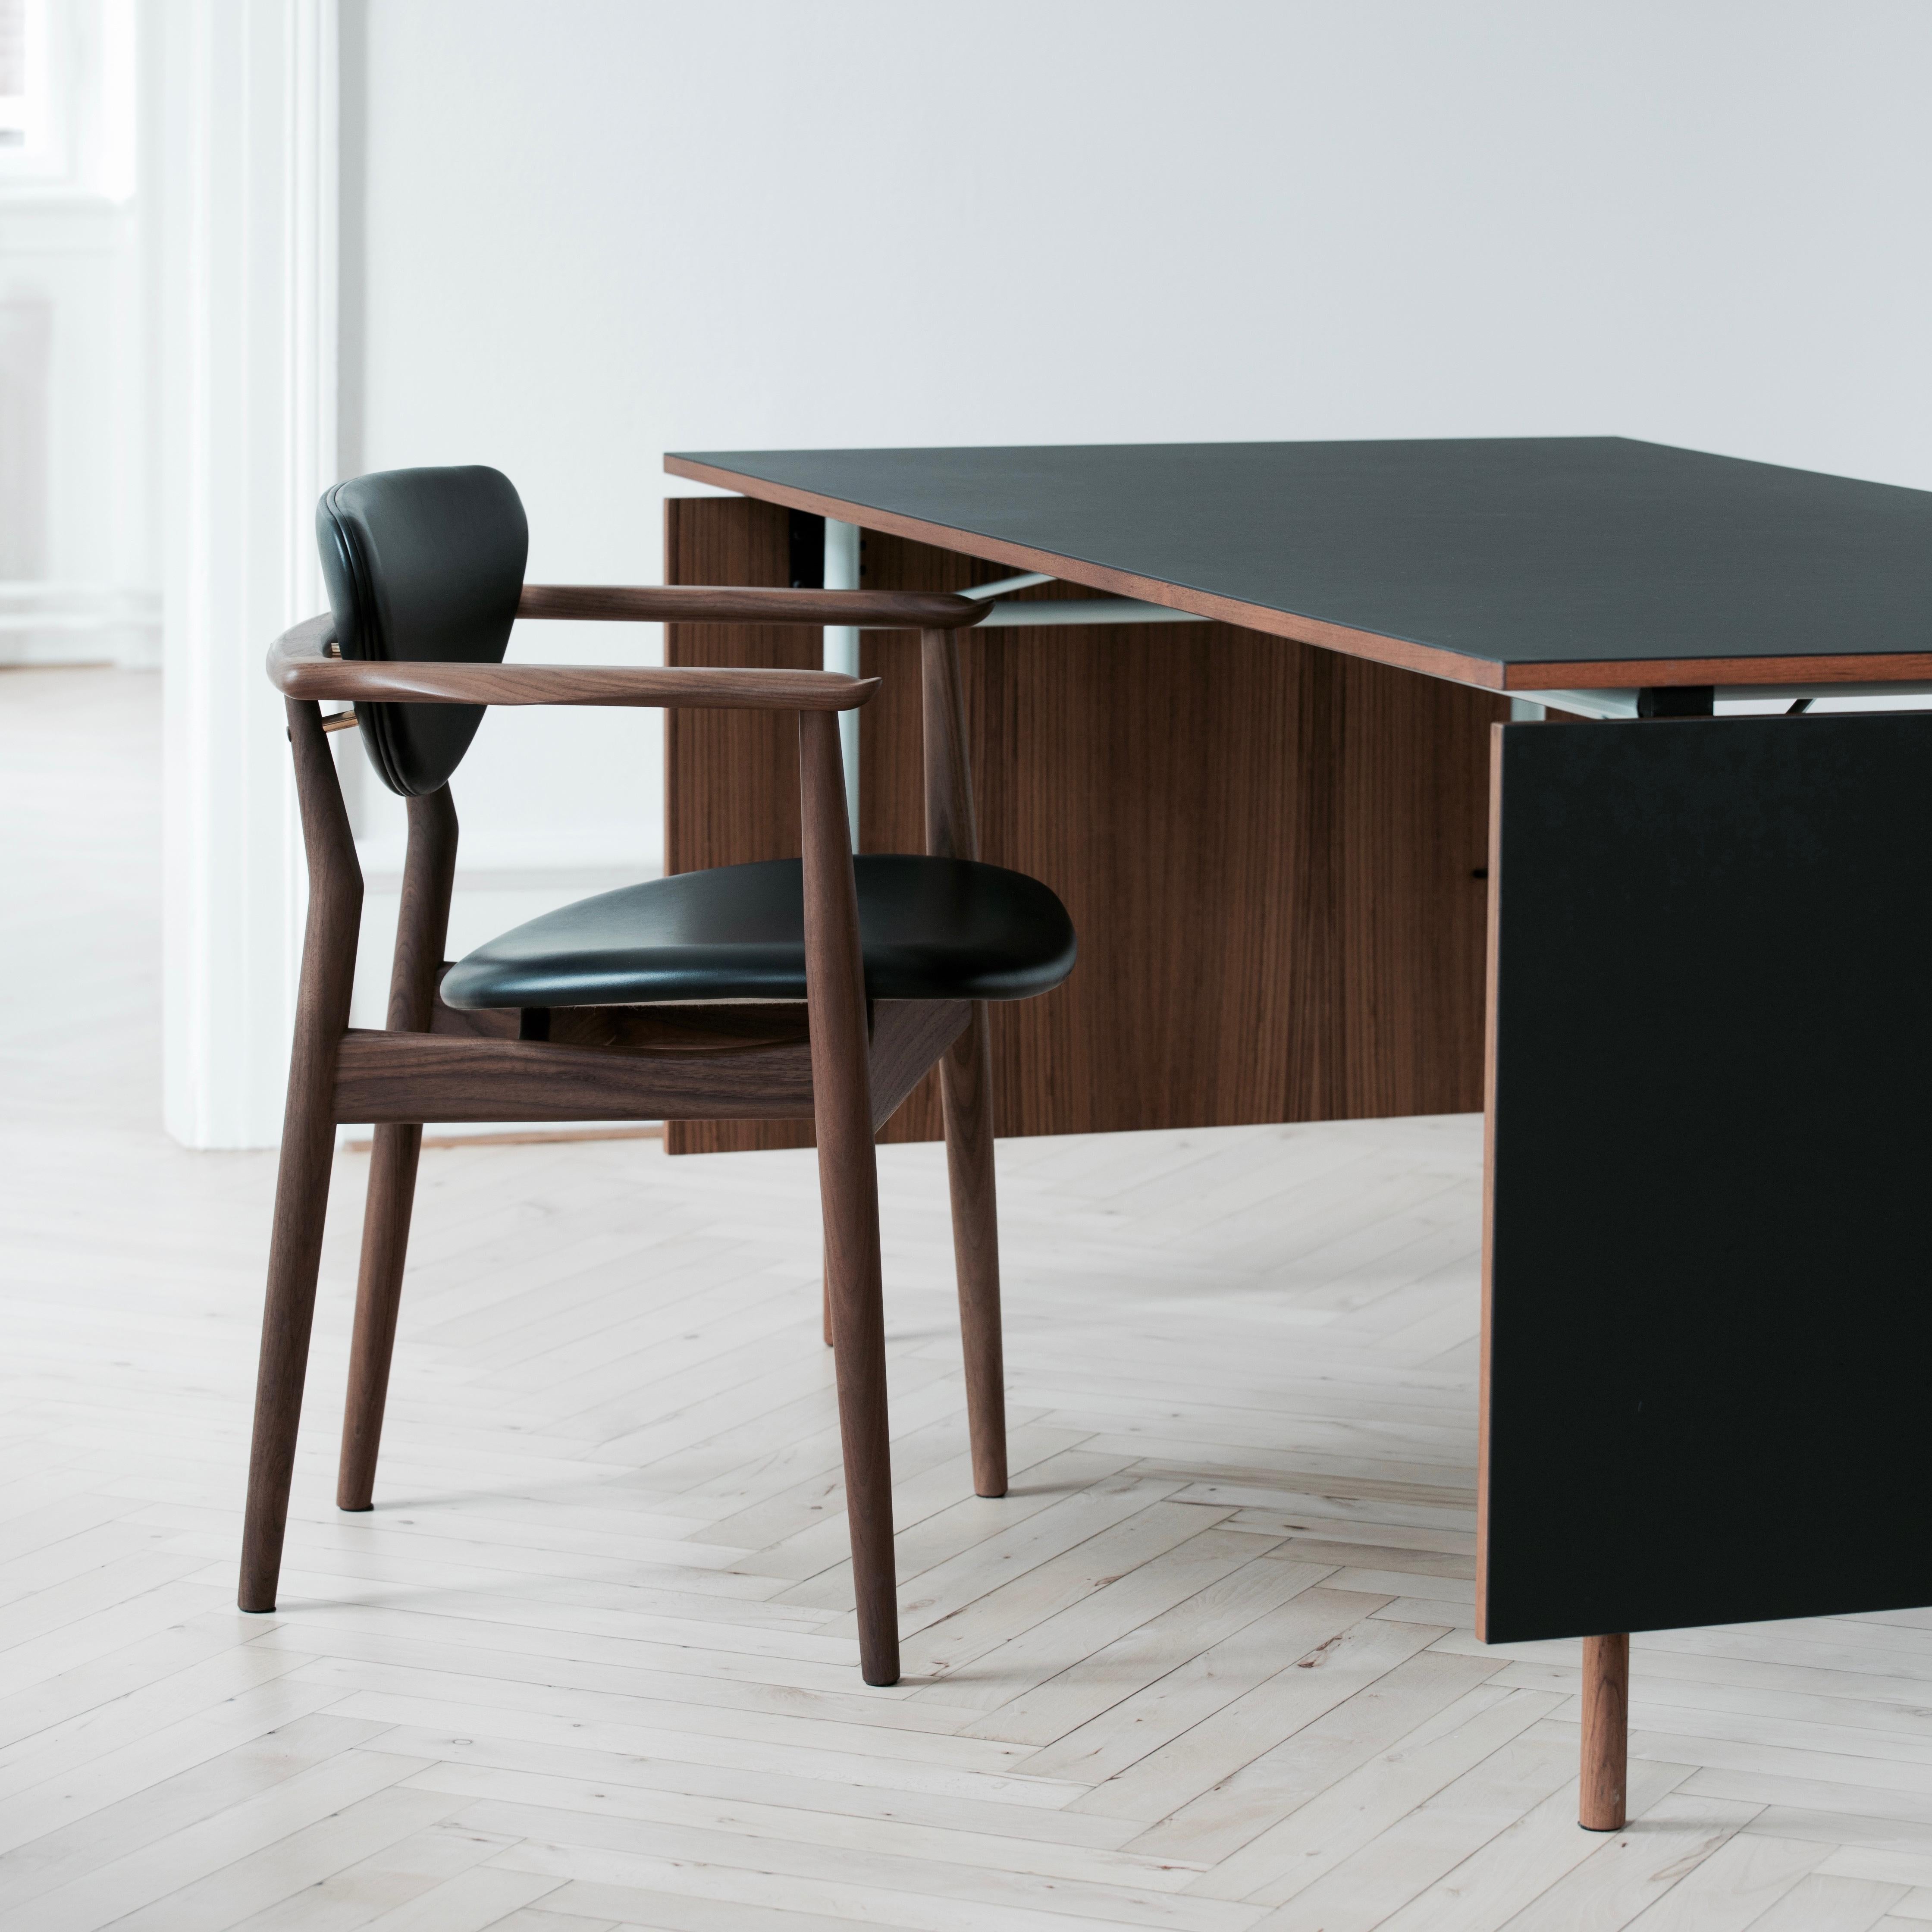 Finn Juhl Nyhavn Dining Table with Two Drop Leaves, Lino and Wood 4